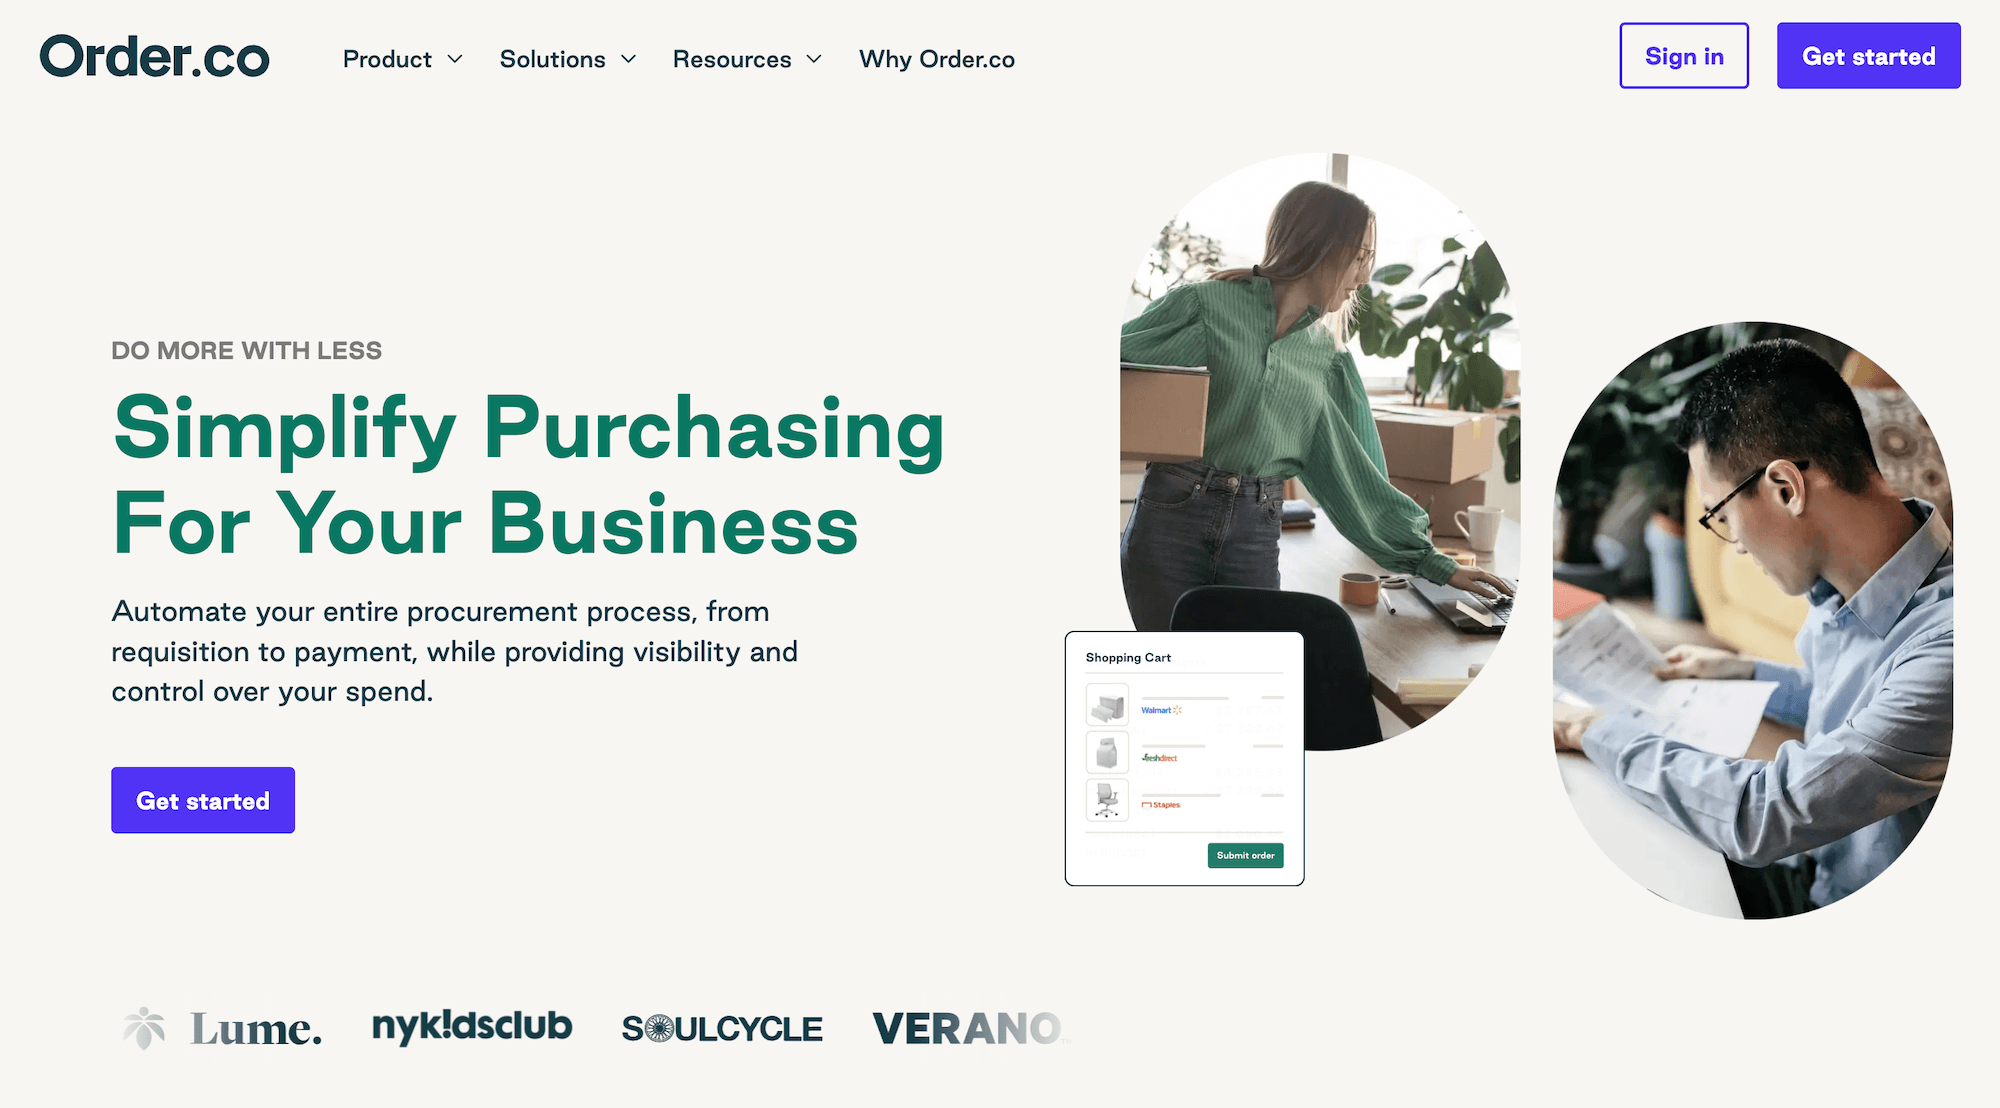 Order.co homepage: Simplify Purchasing, Payments, Budgets, and Approvals For Your Business